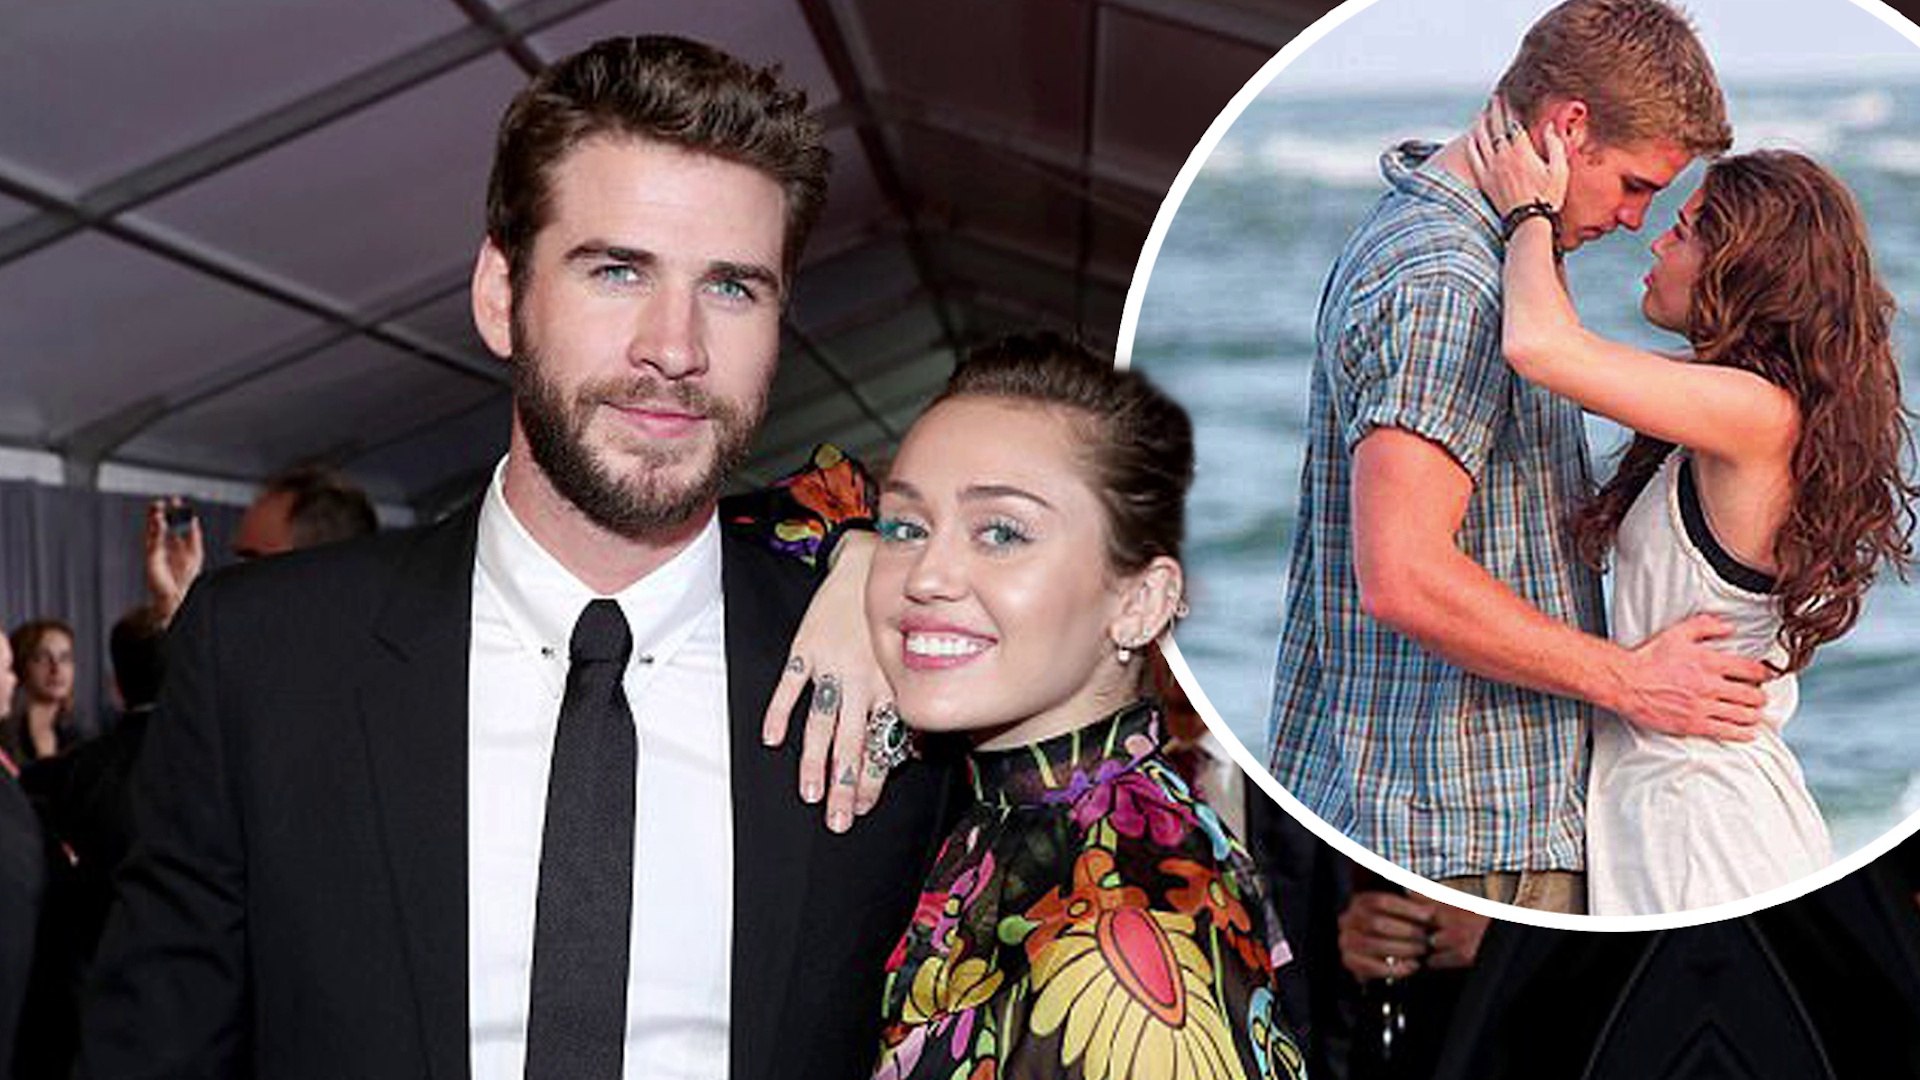 Nesting for a baby! Miley Cyrus and Liam Hemsworth renovate their $7.5 million Tennessee farmhouse a